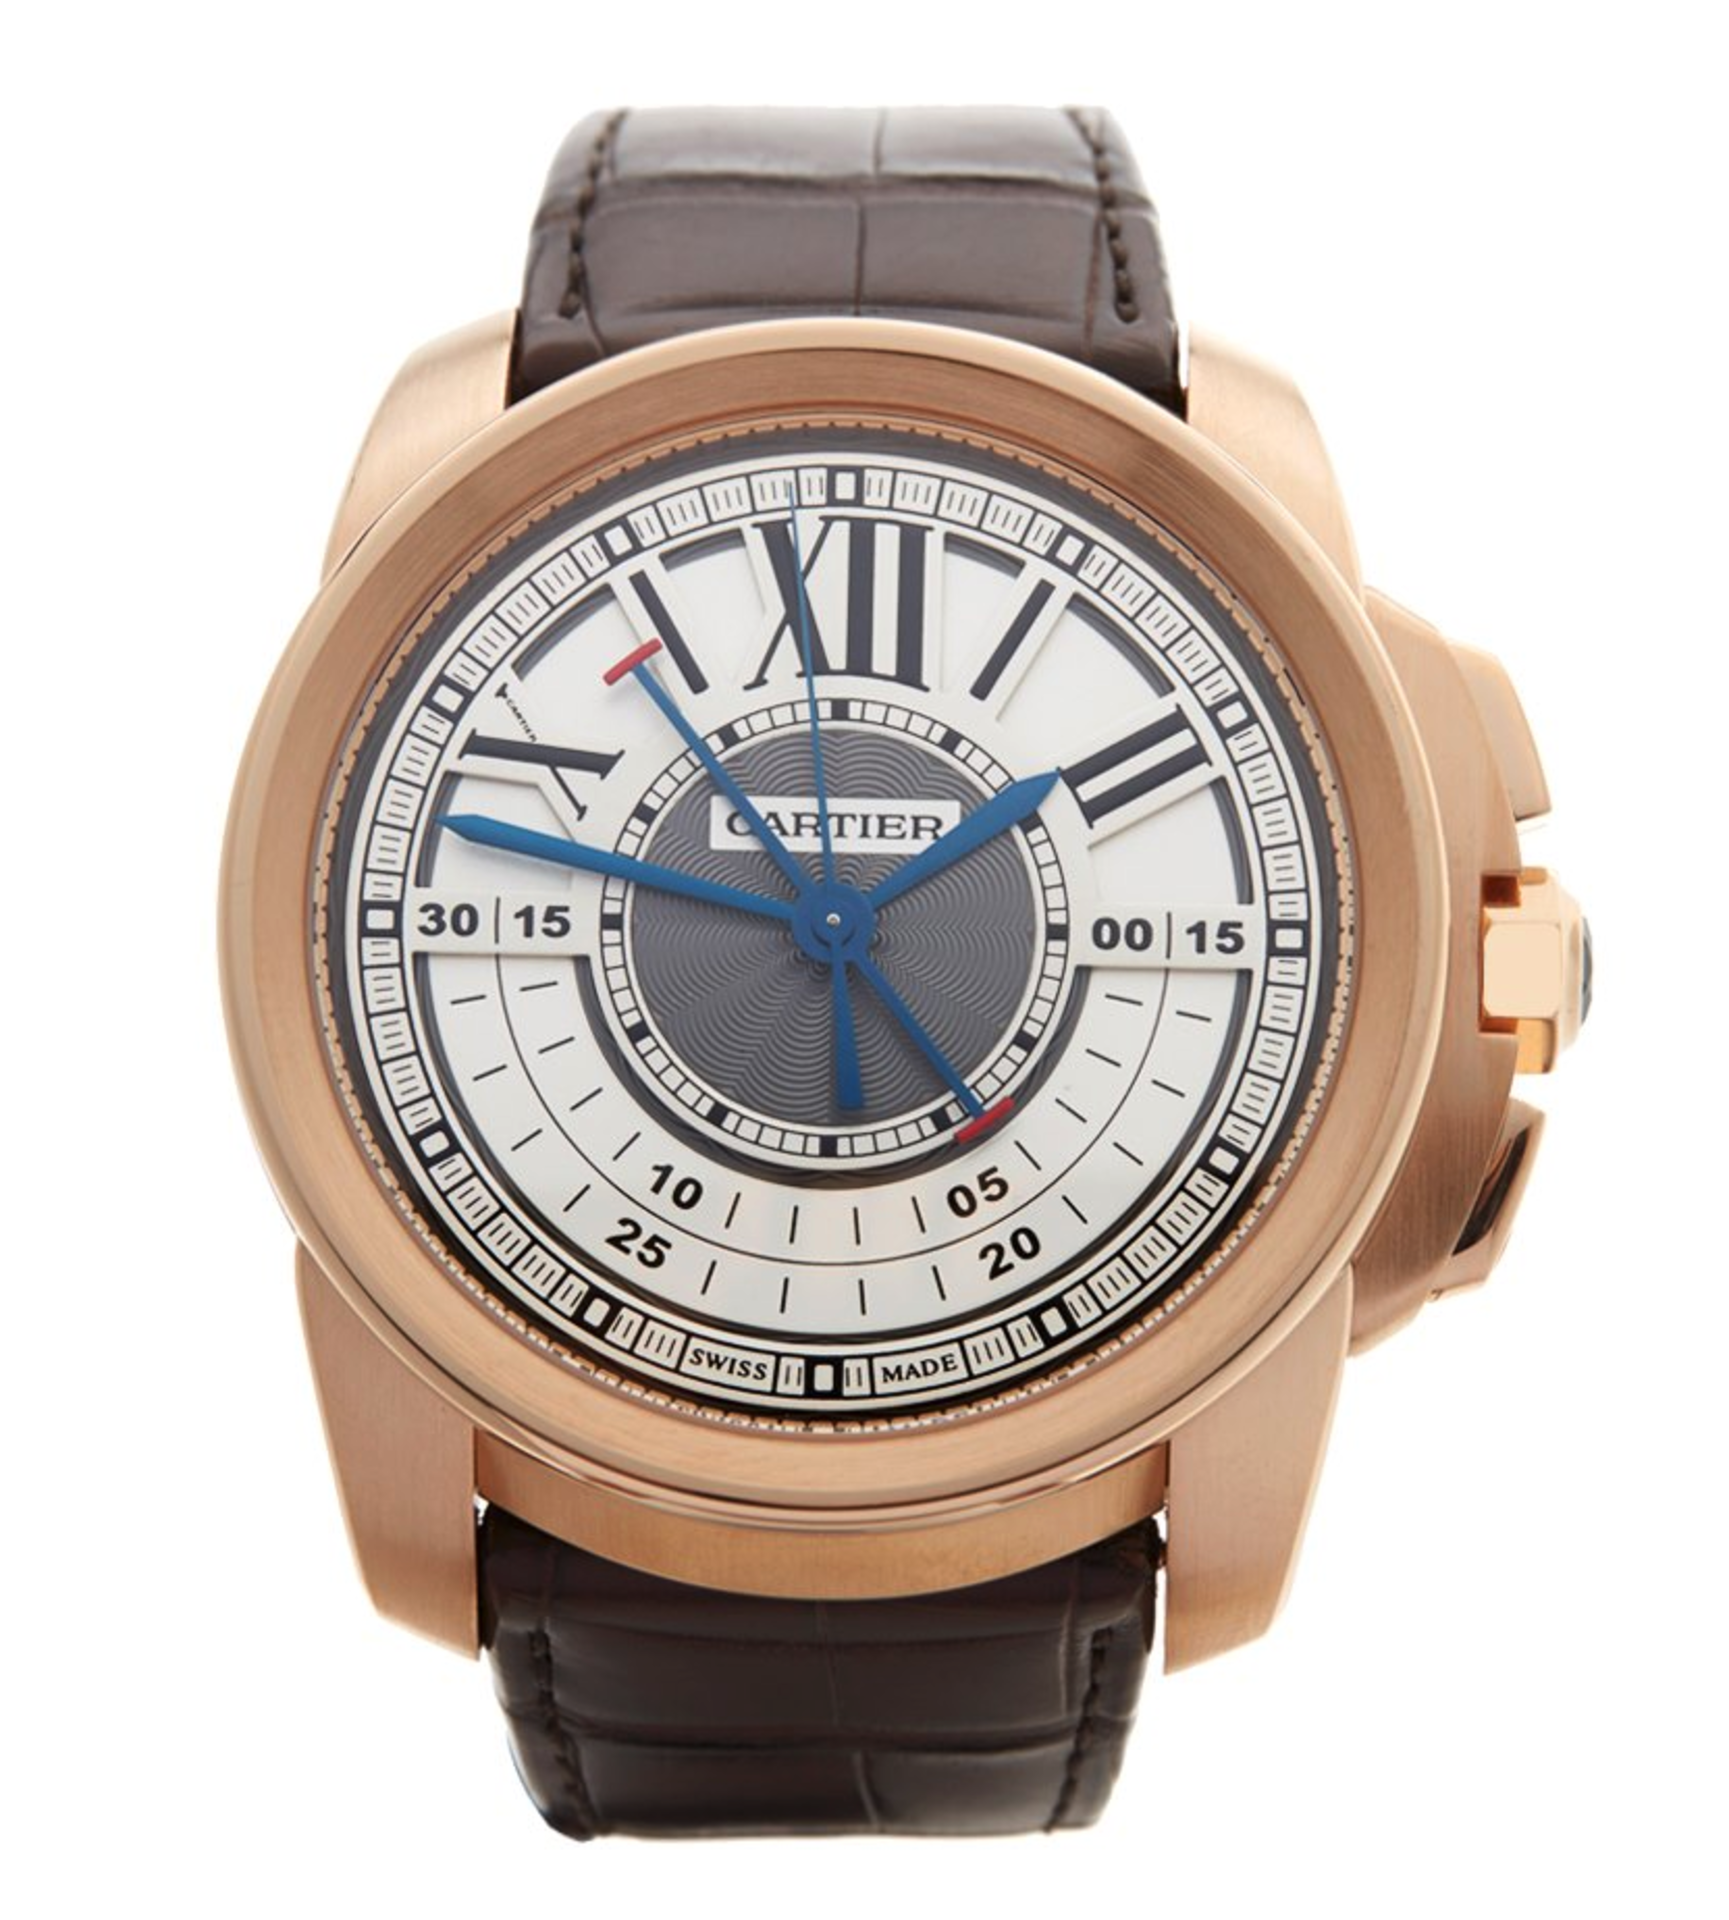 Cartier Calibre Central Chronograph 44mm 18K Rose Gold - 3242 or W7100004 - Image 7 of 9